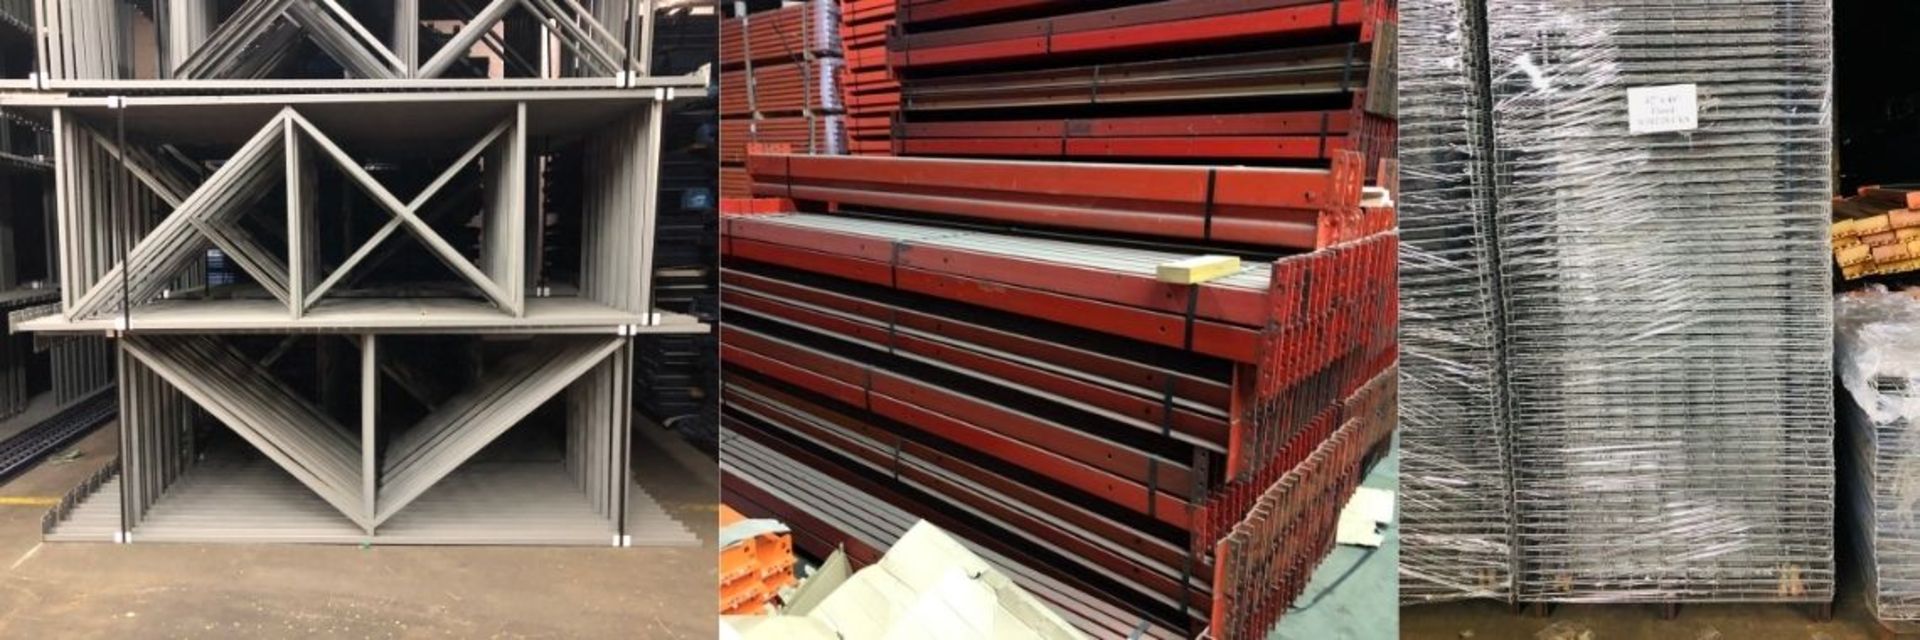 14 BAYS OF 10.5'H X 42"D X 102"L STRUCTURAL STYLE PALLET RACKS - Image 2 of 6